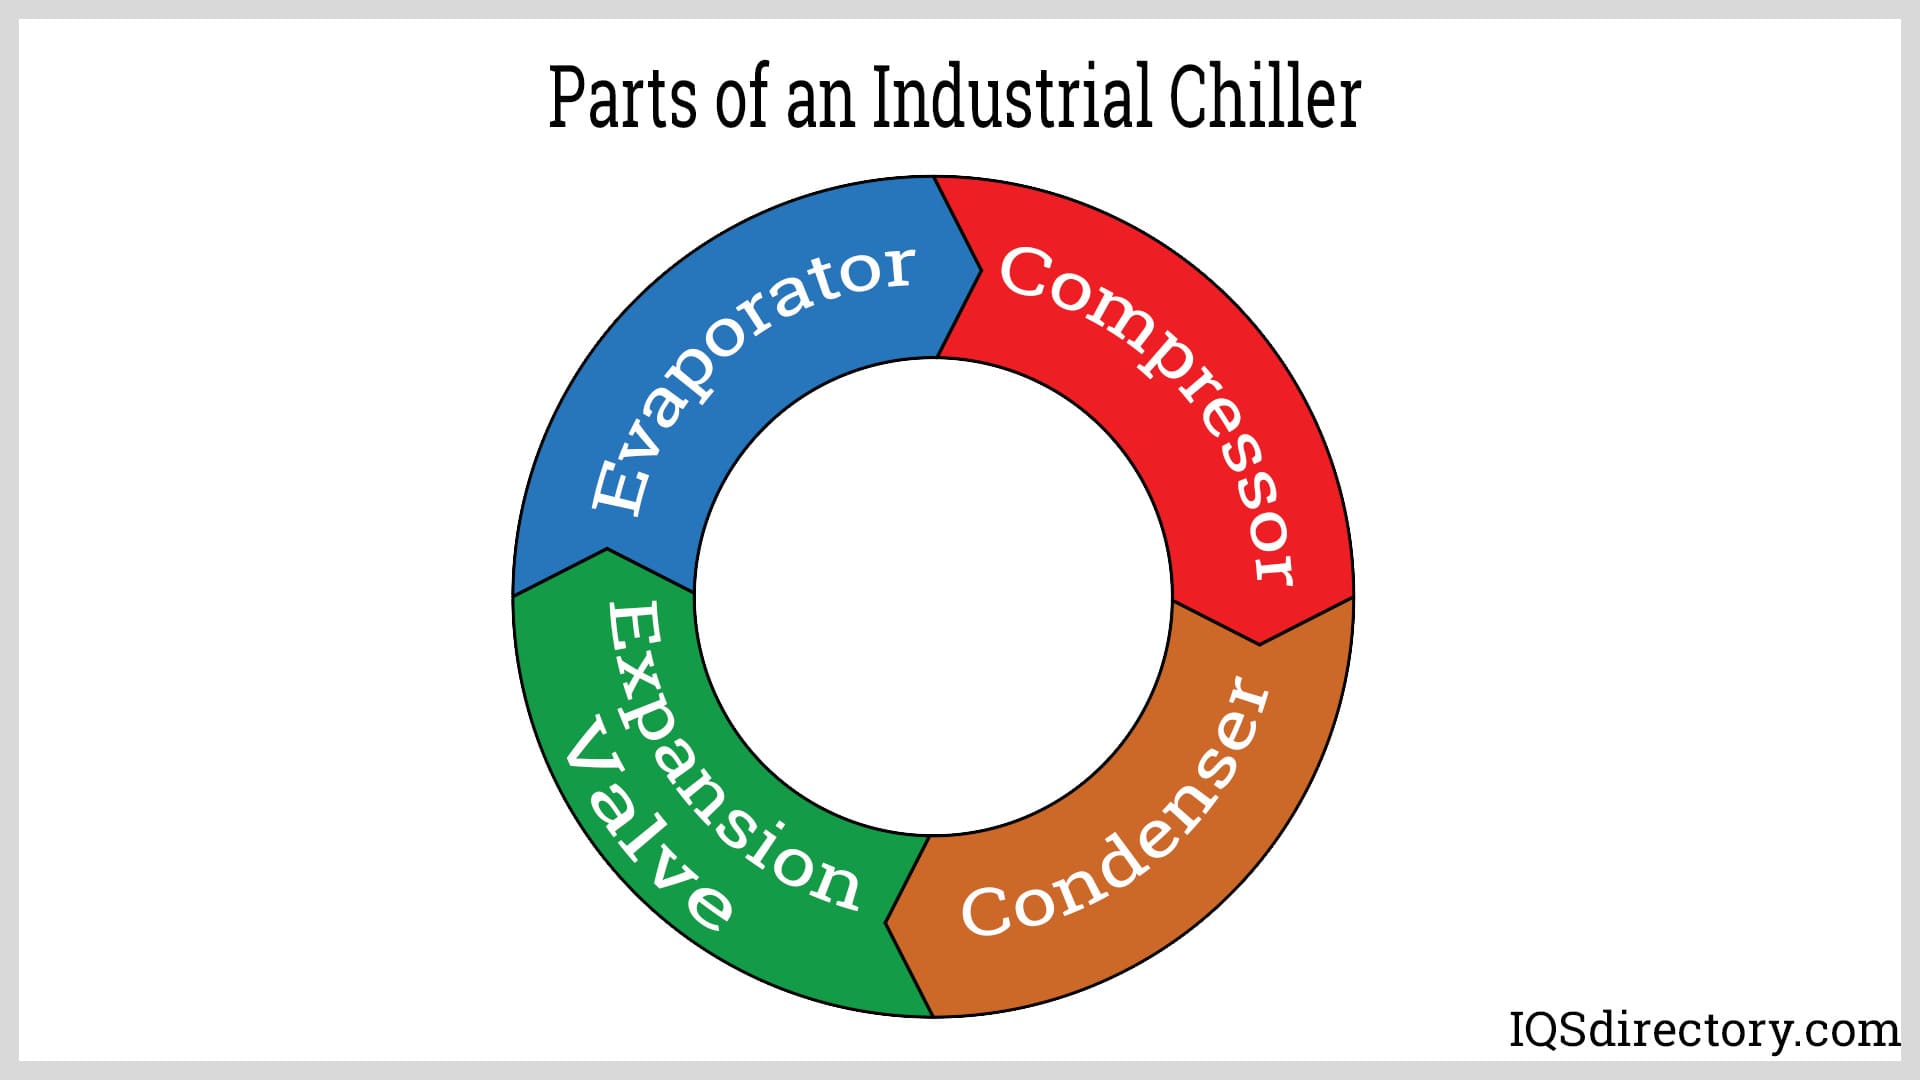 Parts of an Industrial Chiller